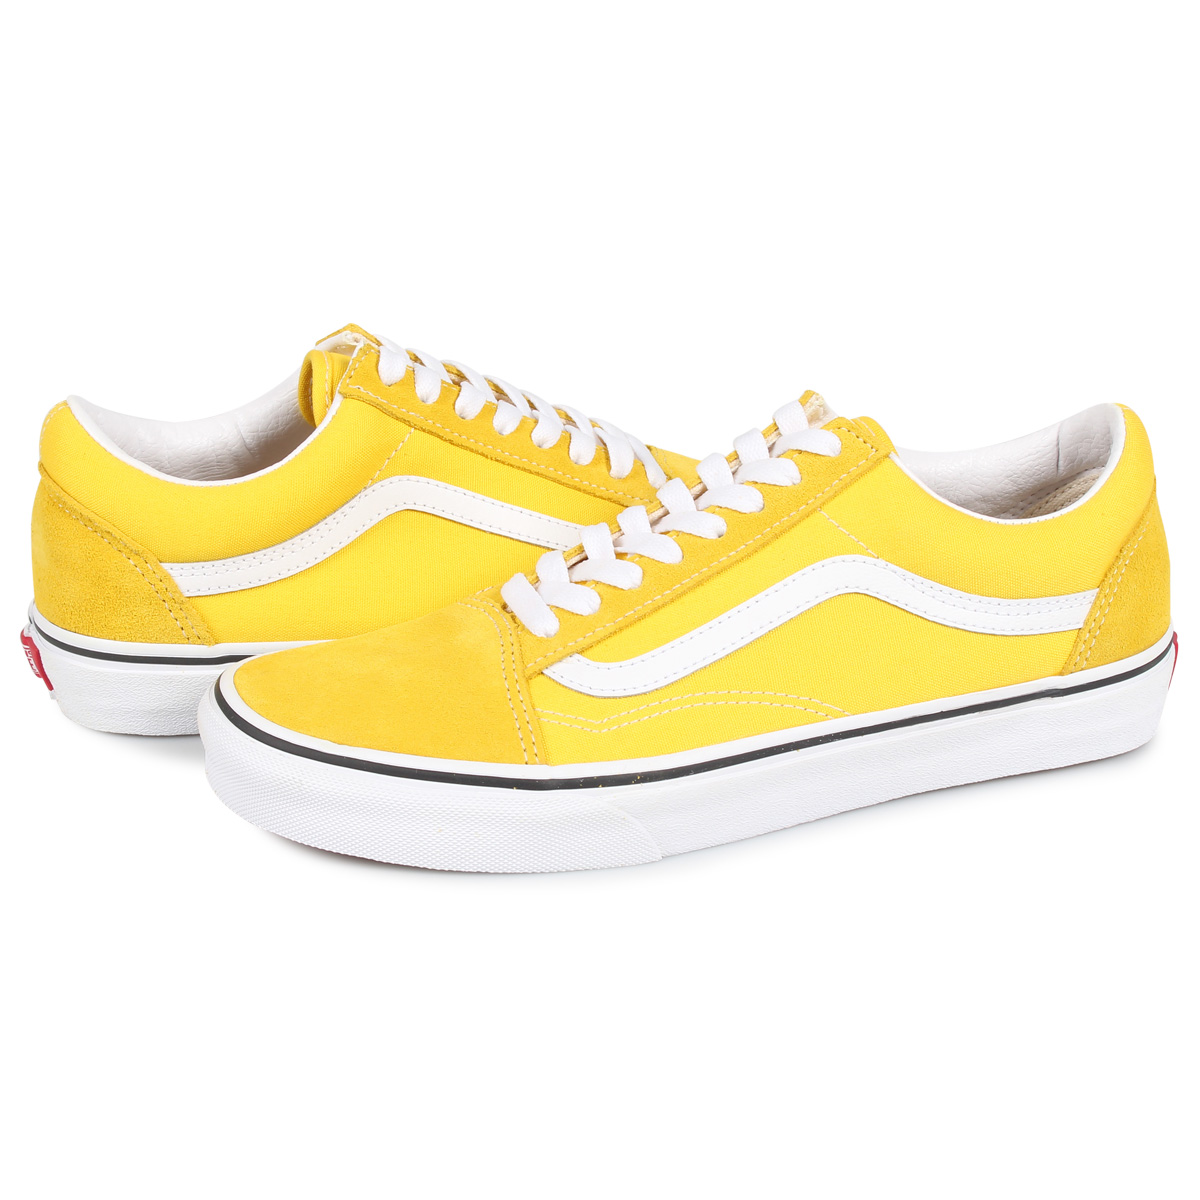 where can i buy yellow vans